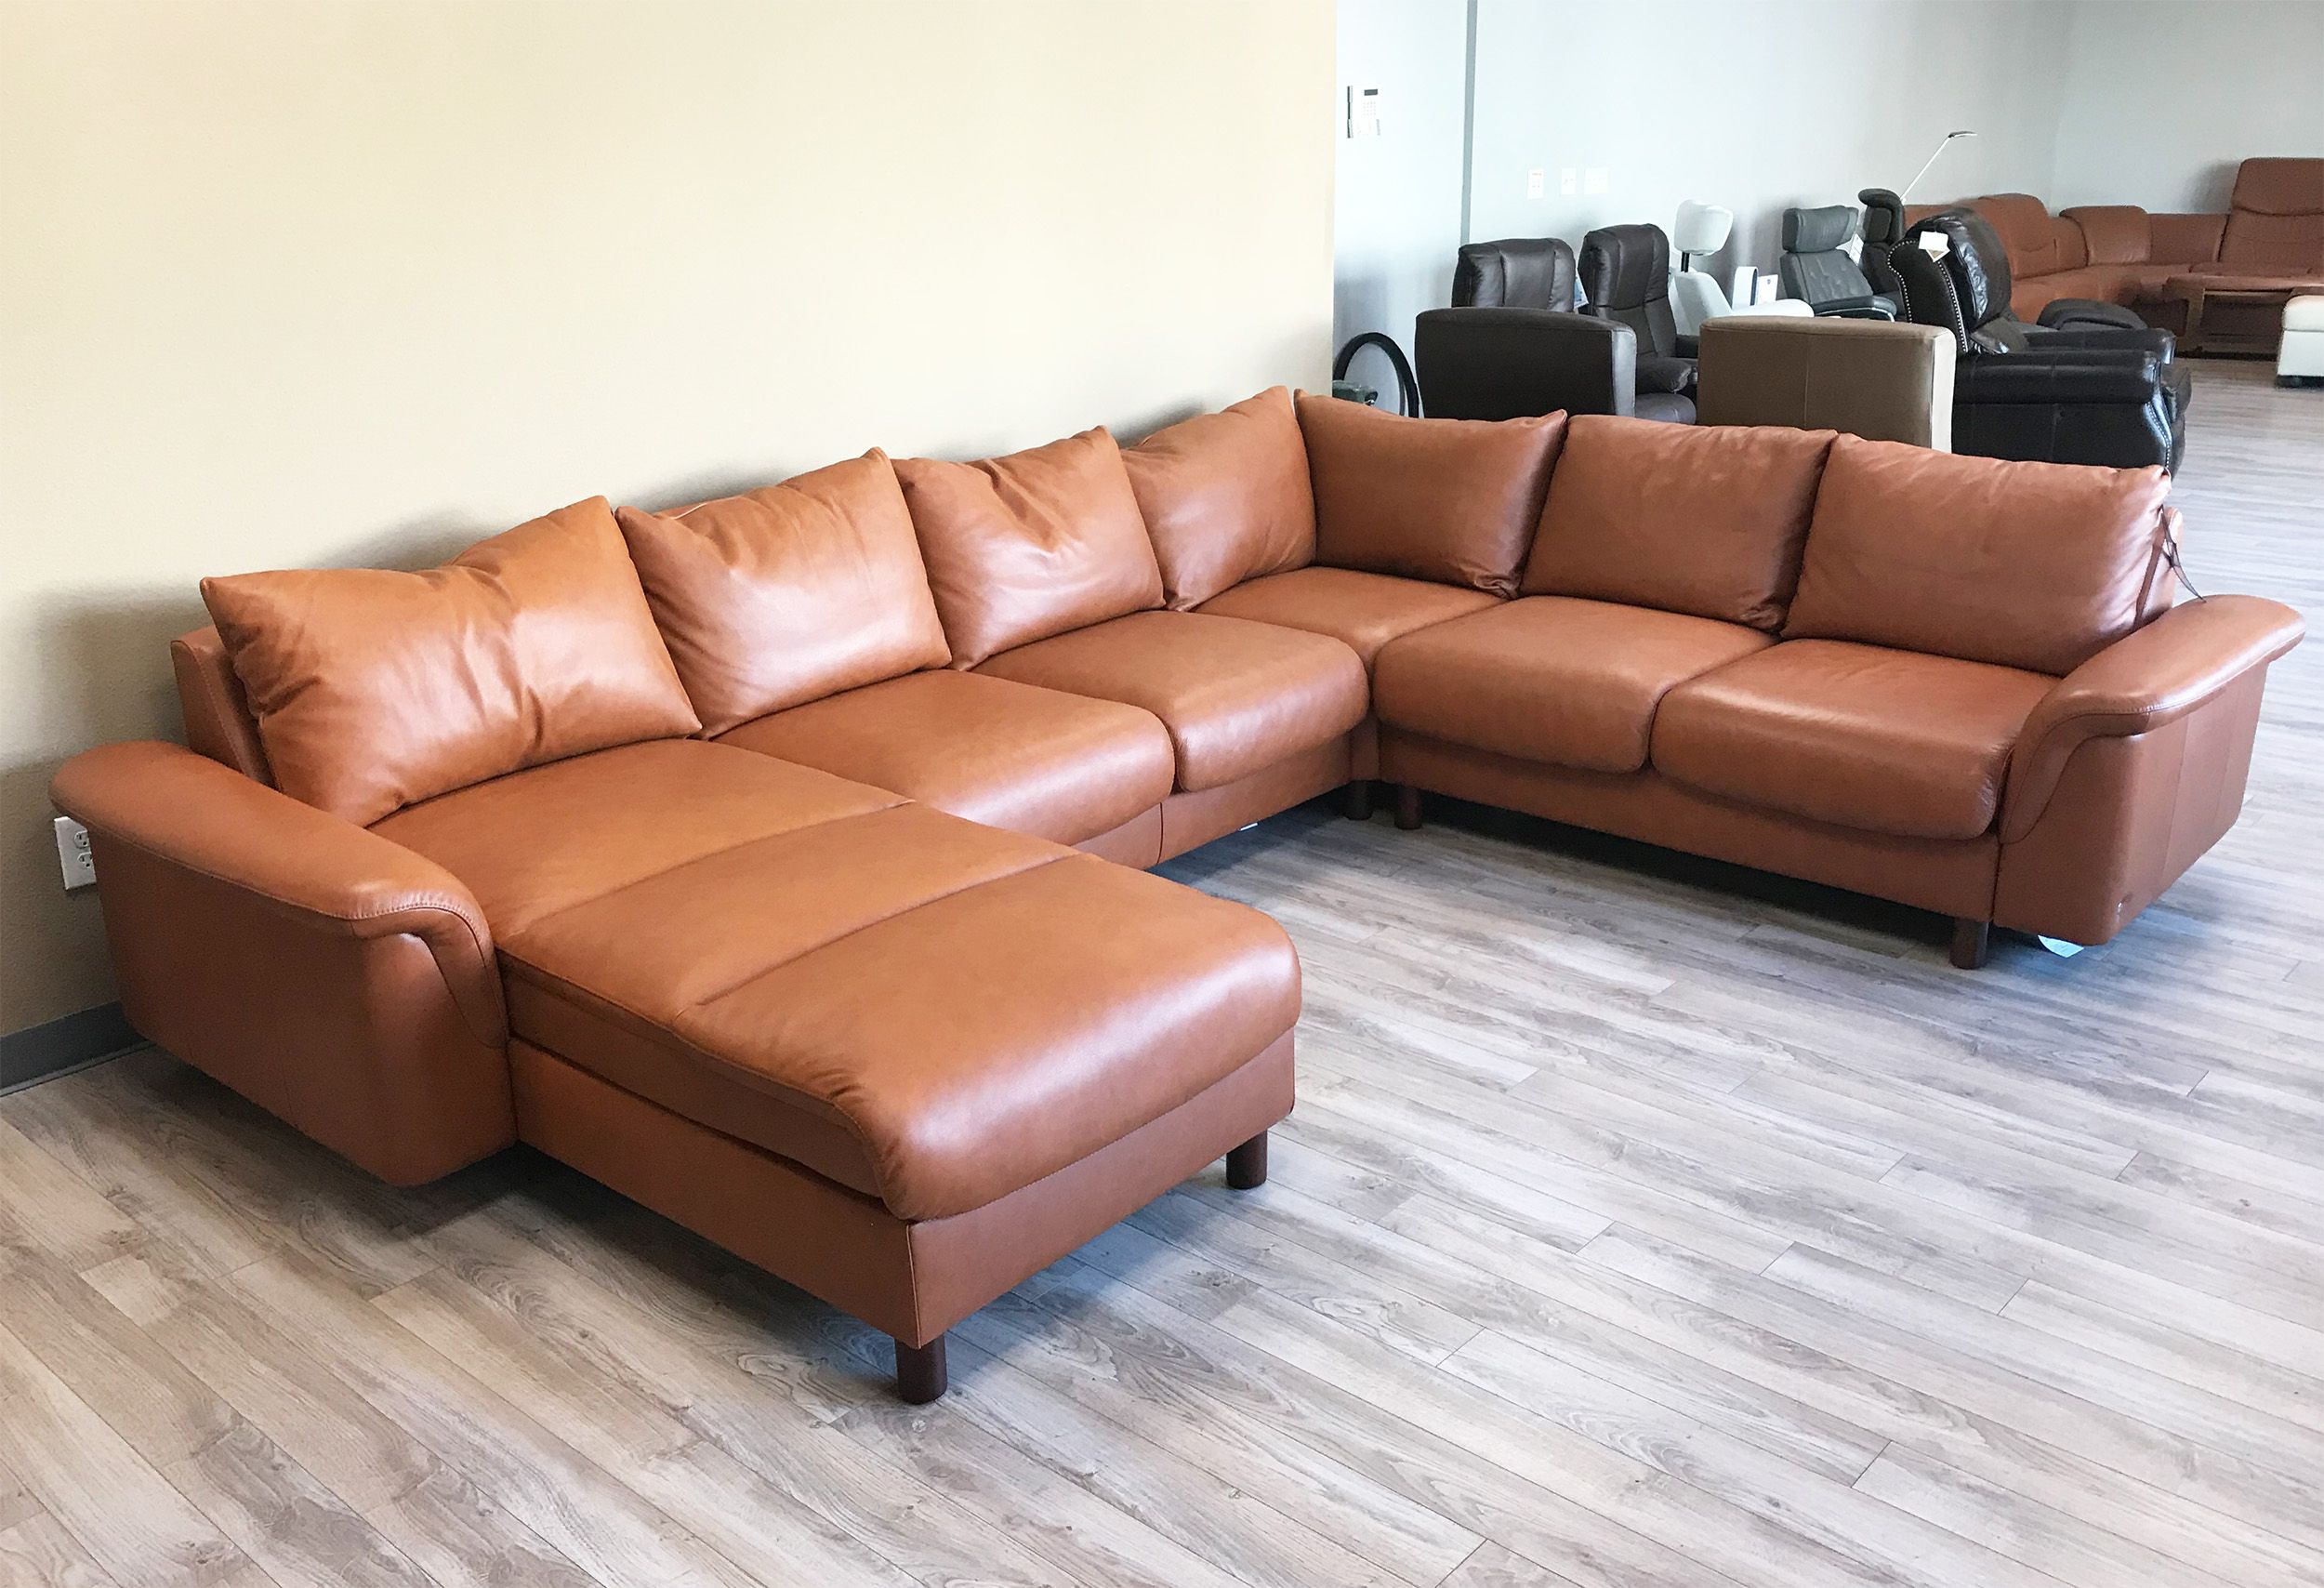 Stressless E300 6 Seat Sectional Sofa With Longseat In Royalin Tigereye  Leatherekornes – Stressless E300 3 Seat Sofa With Regard To 6 Seater Sectional Couches (View 7 of 20)